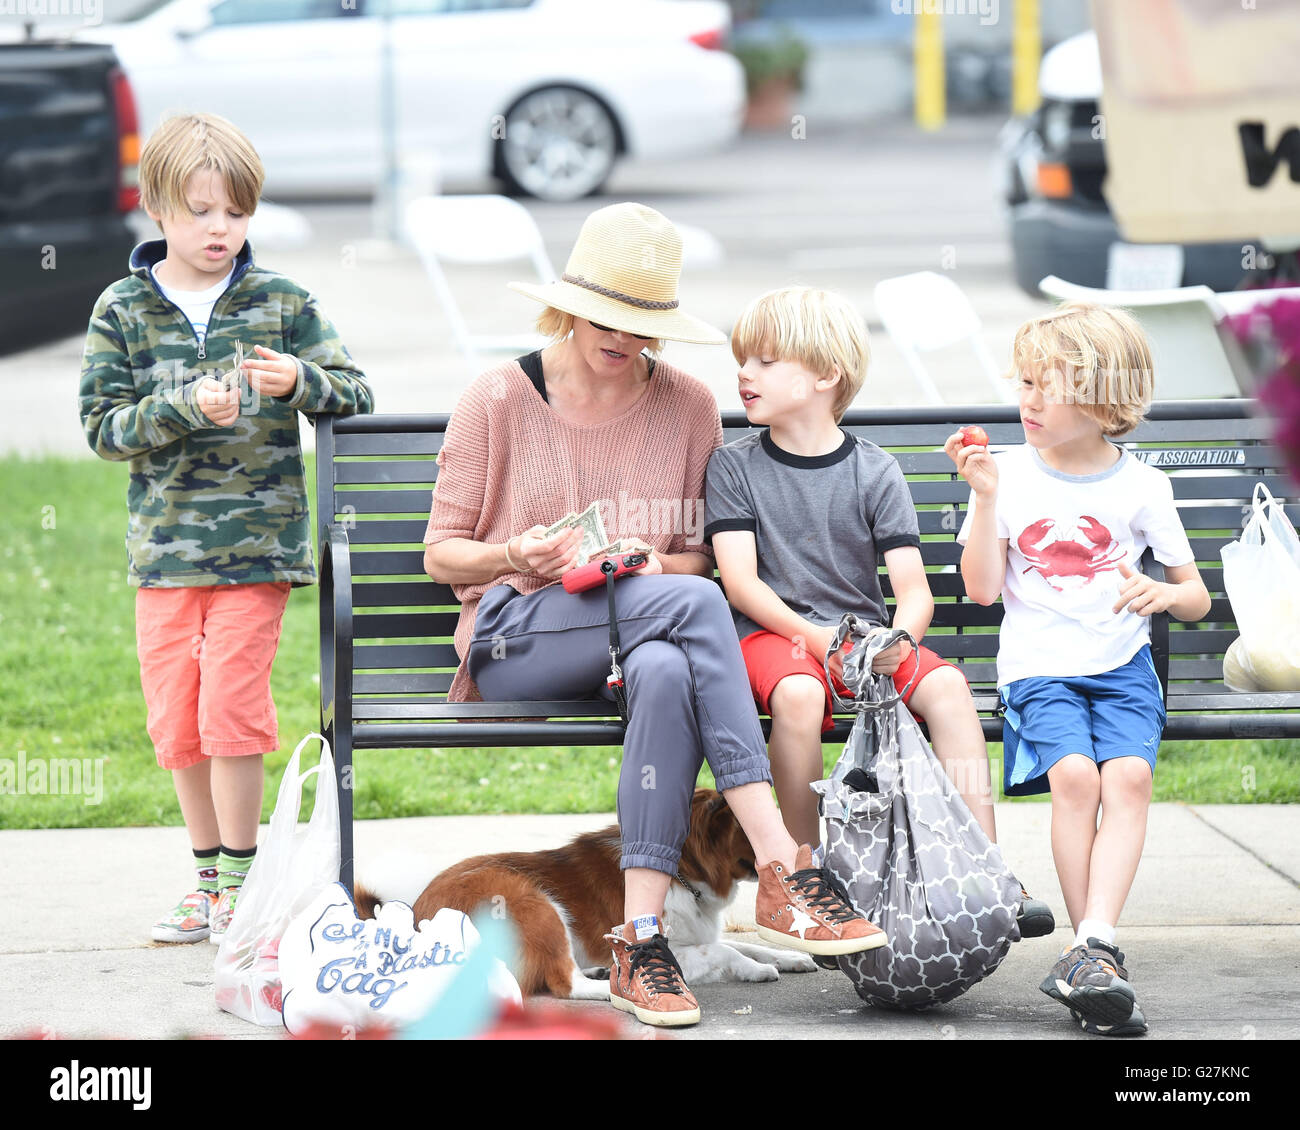 Julie Bowen entertains her three boys during a trip to the Farmers Market  Featuring: Julie Bowen, Oliver McLanahan Phillips, John Phillips, Gustav Phillips Where: Los Angeles, California, United States When: 10 Apr 2016 Stock Photo